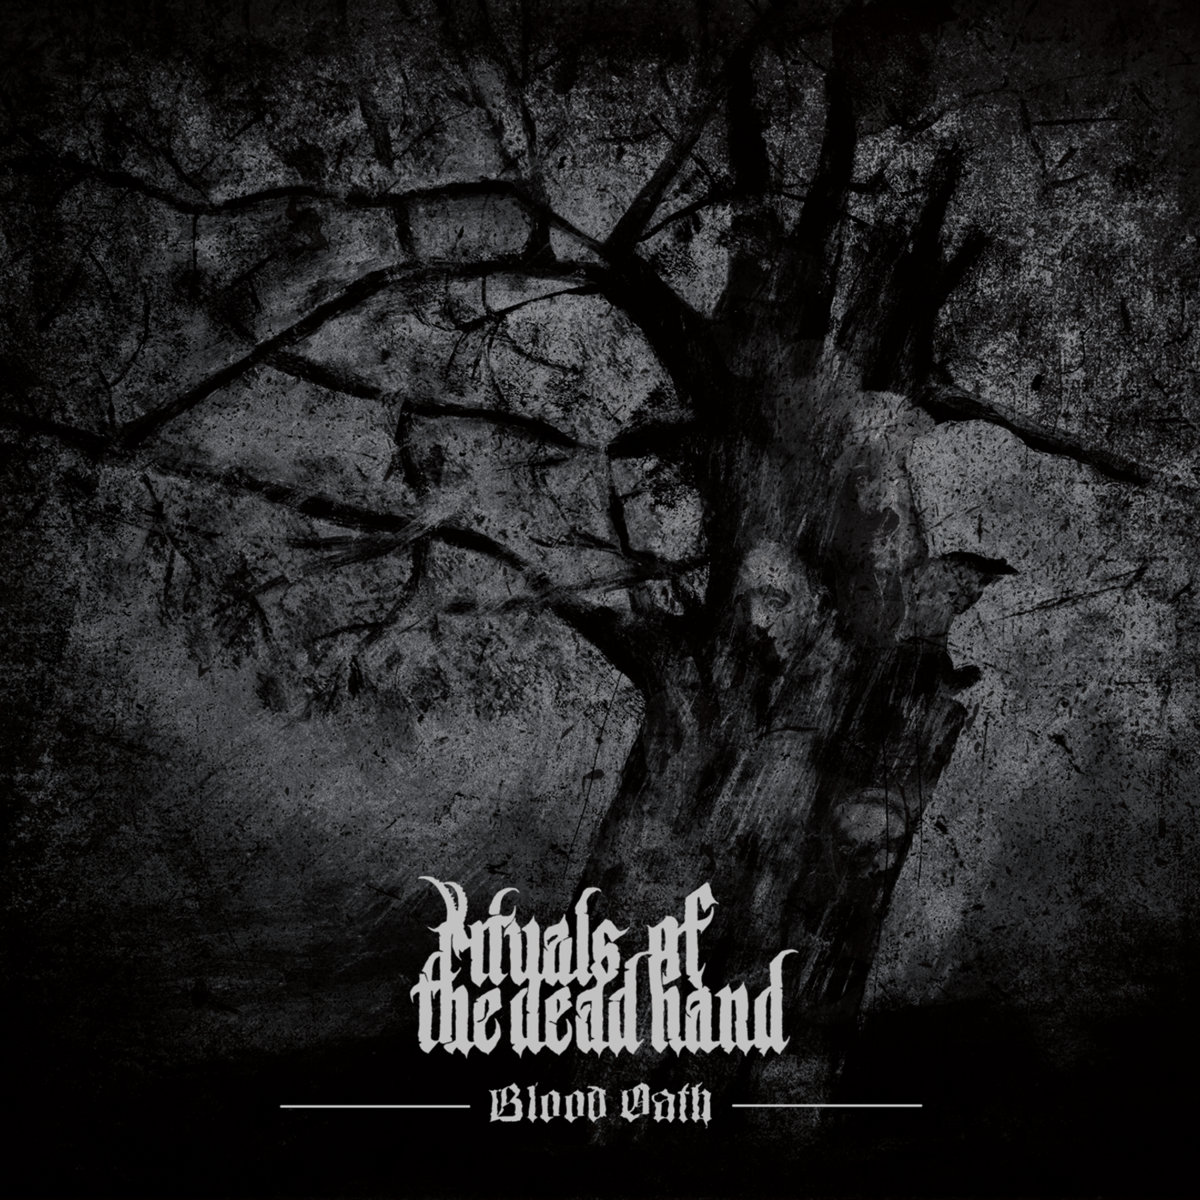 rituals of the dead hand – blood oath